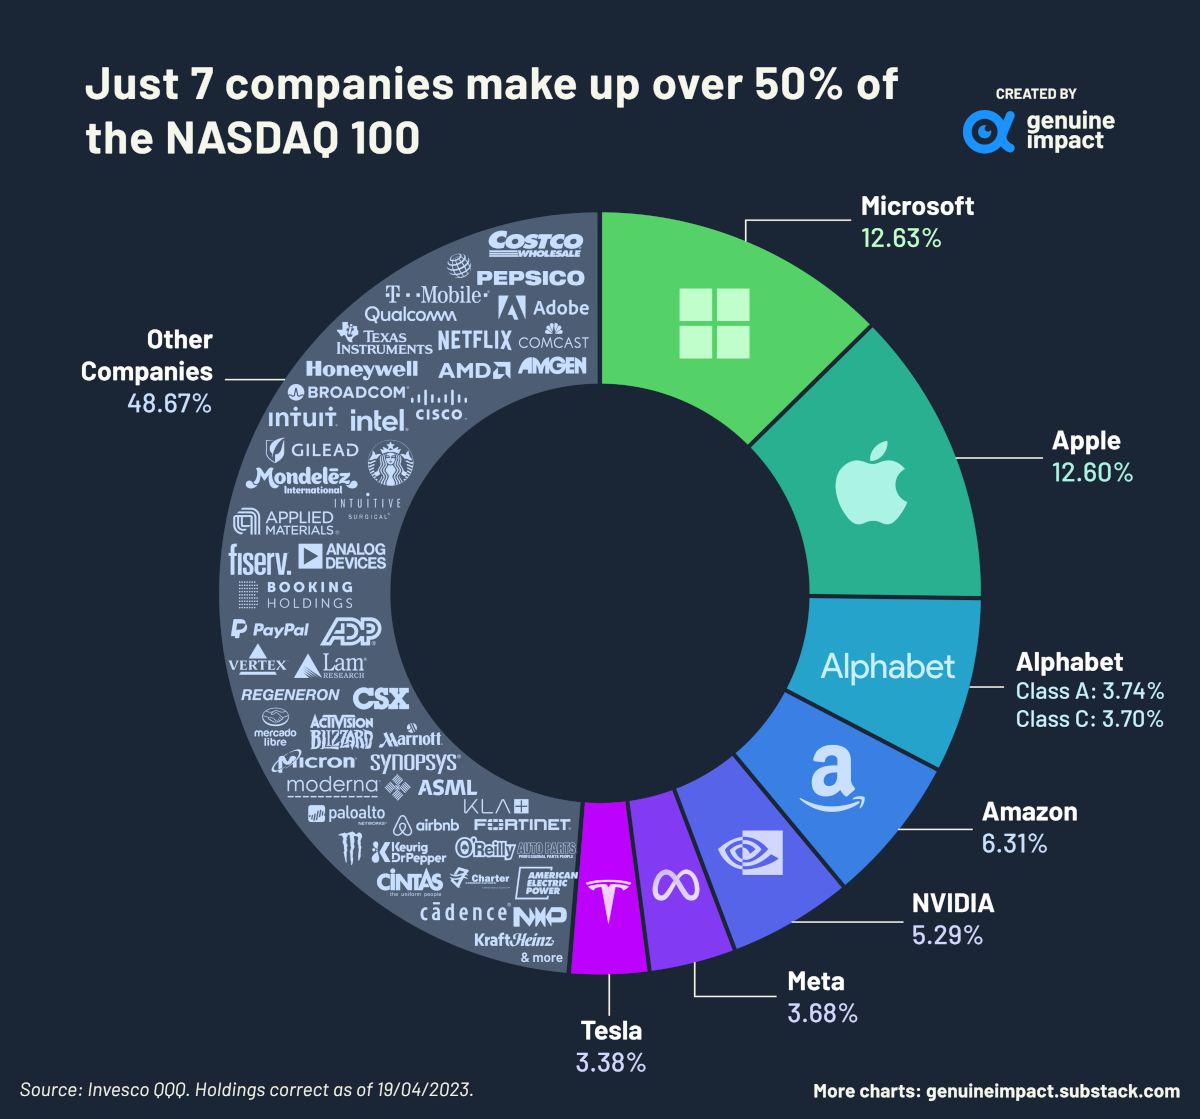 A donut chart showing how just seven companies make up over 50% of the NASDAQ 100 by weight.